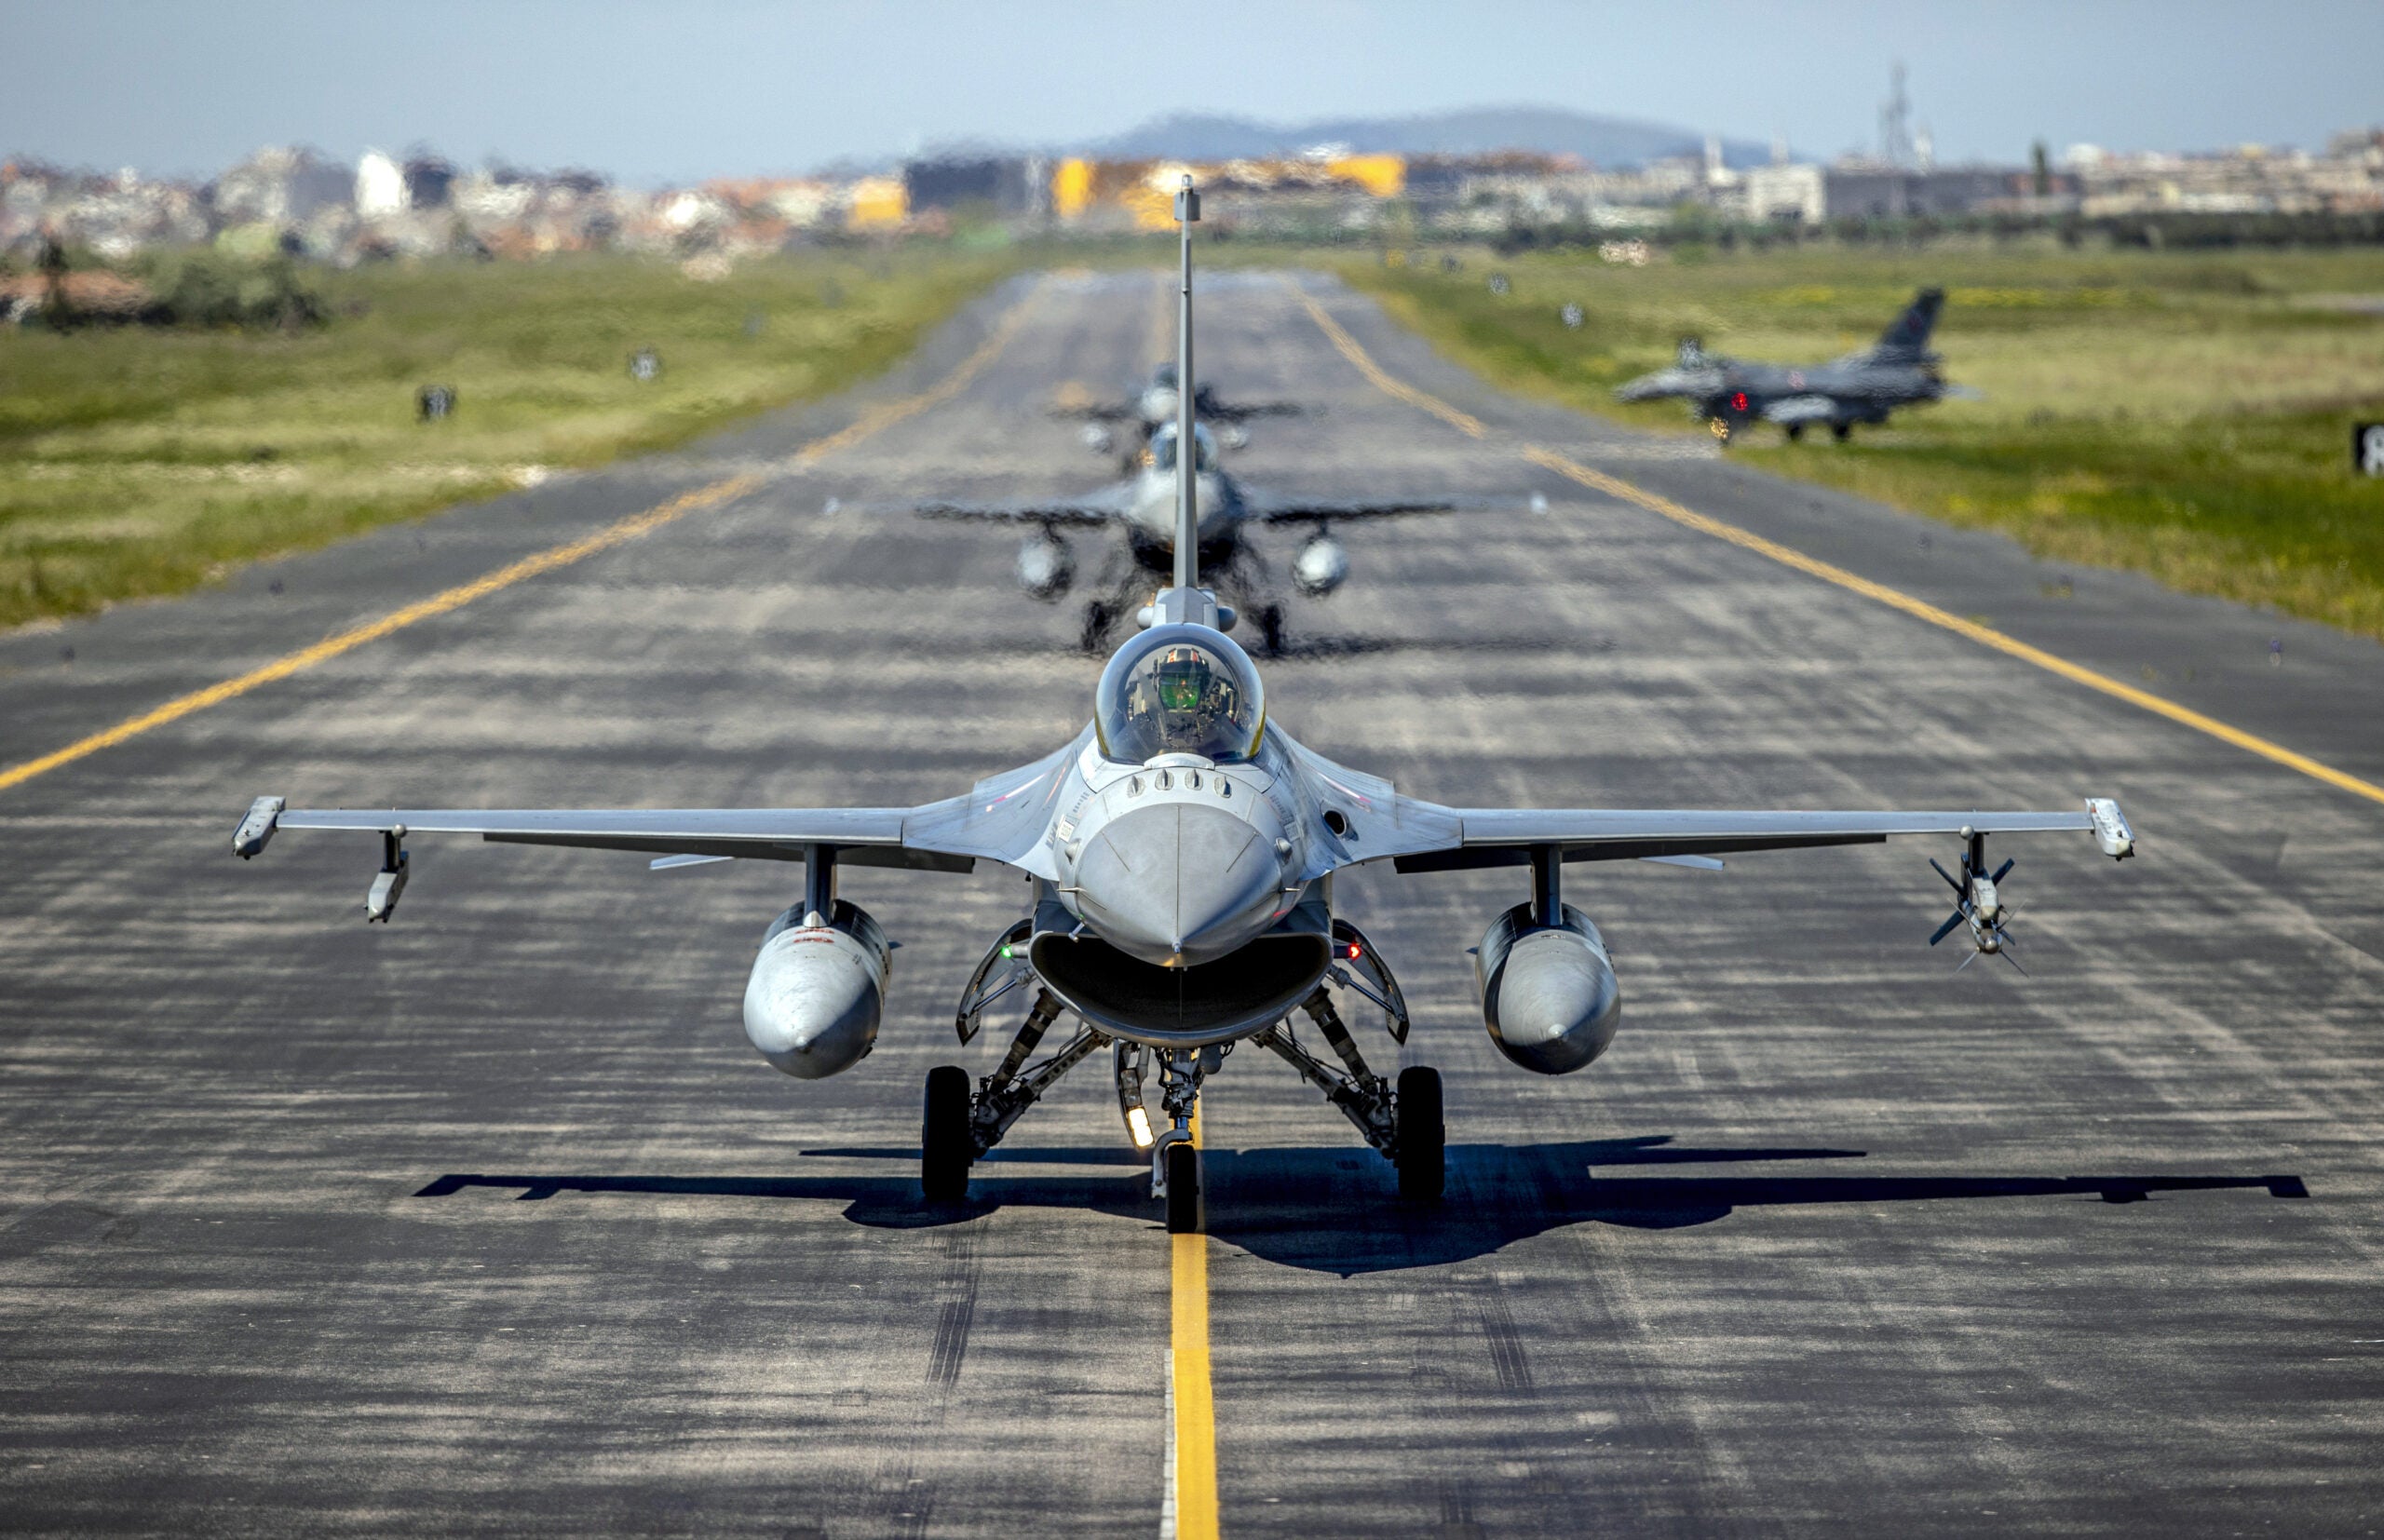 BALIKESIR, TURKIYE - MAY 22: Turkish Air Force F-16 fighter aircrafts are seen during test flight in Balikesir, Turkiye on May 22, 2022. The 161st Fleet Command, the only fleet of the Turkish Air Force with two call names - coded as "Eagle" during the day and "Bat" at night - takes an active role in both the protection of the airspace in Aegean Region and the combat against terrorism. (Photo by Ali Atmaca/Anadolu Agency via Getty Images)